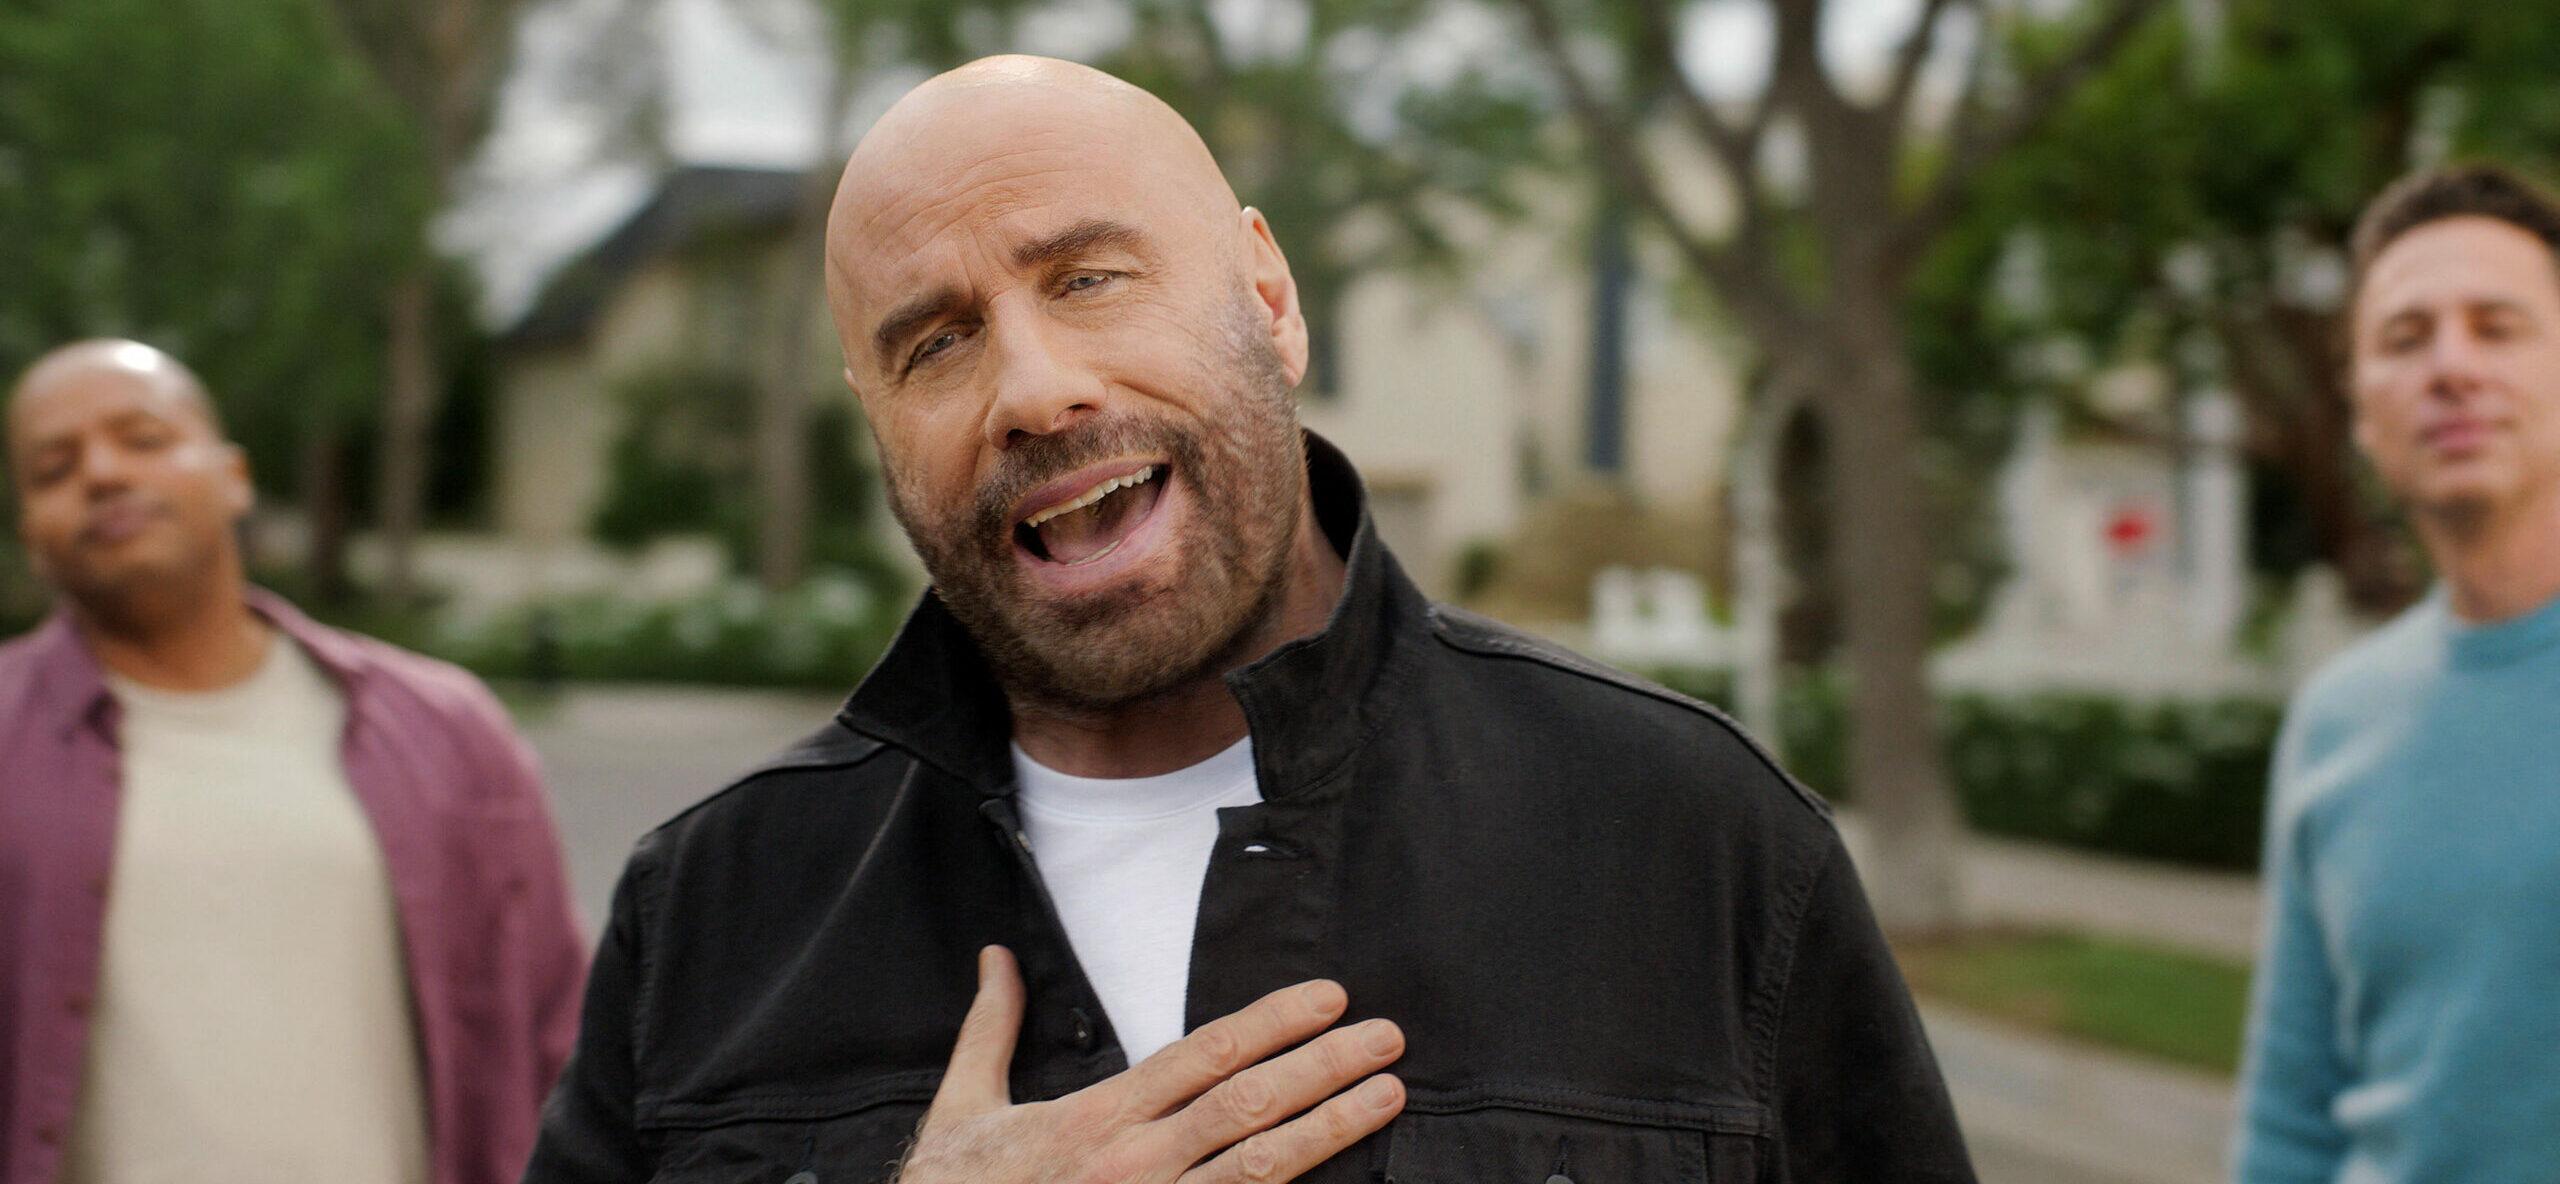 John Travolta spoofs Grease song Summer Nights in T-Mobile Super Bowl ad with Zach Braff and Donald Faison